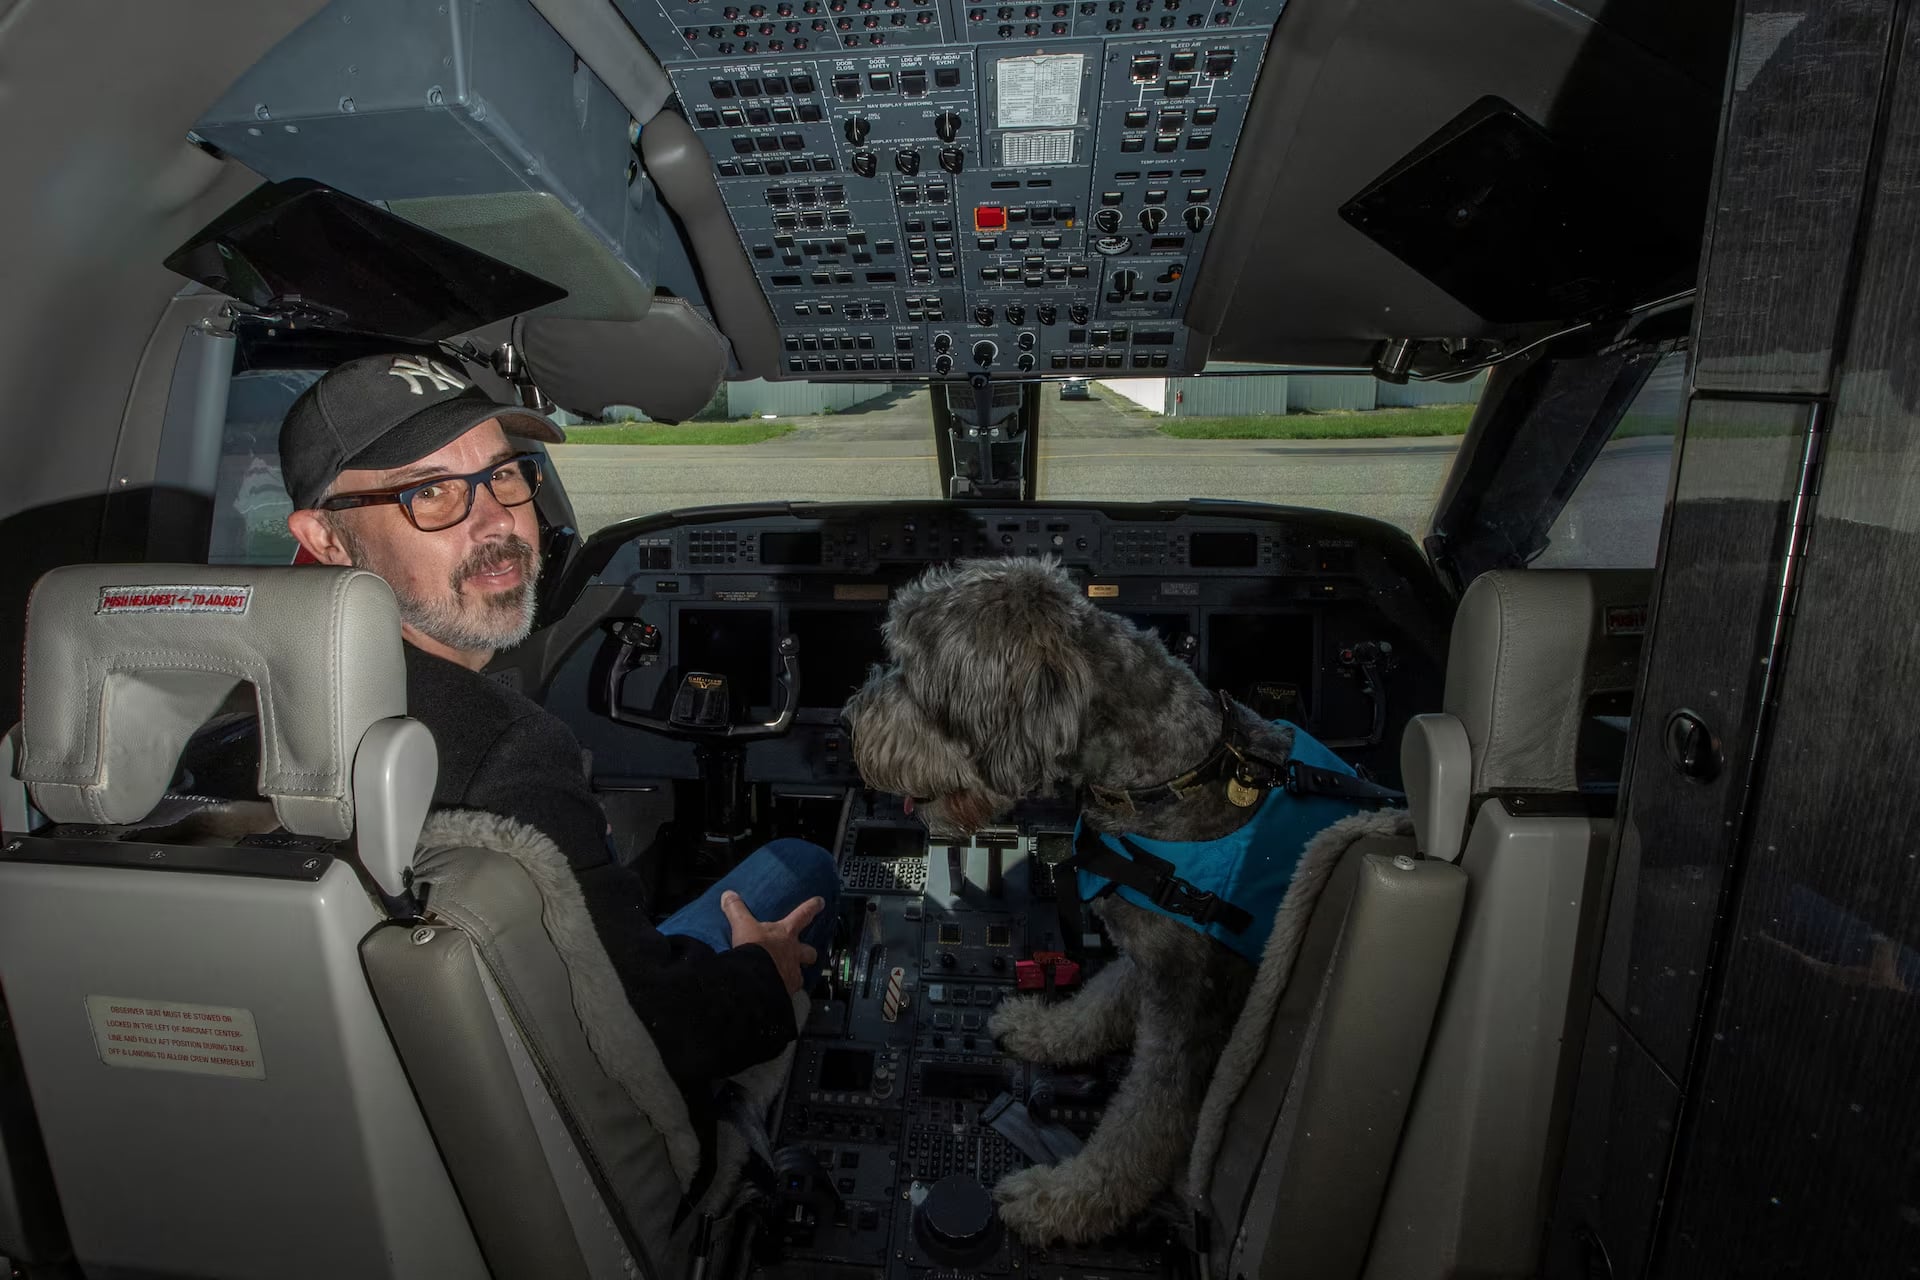 Bark Air’s CEO Matt Meeker poses for a picture during a press event introducing Bark Air, an airline for dogs, at Republic Airport in East Farmingdale, New York, May 21. Photo: Reuters